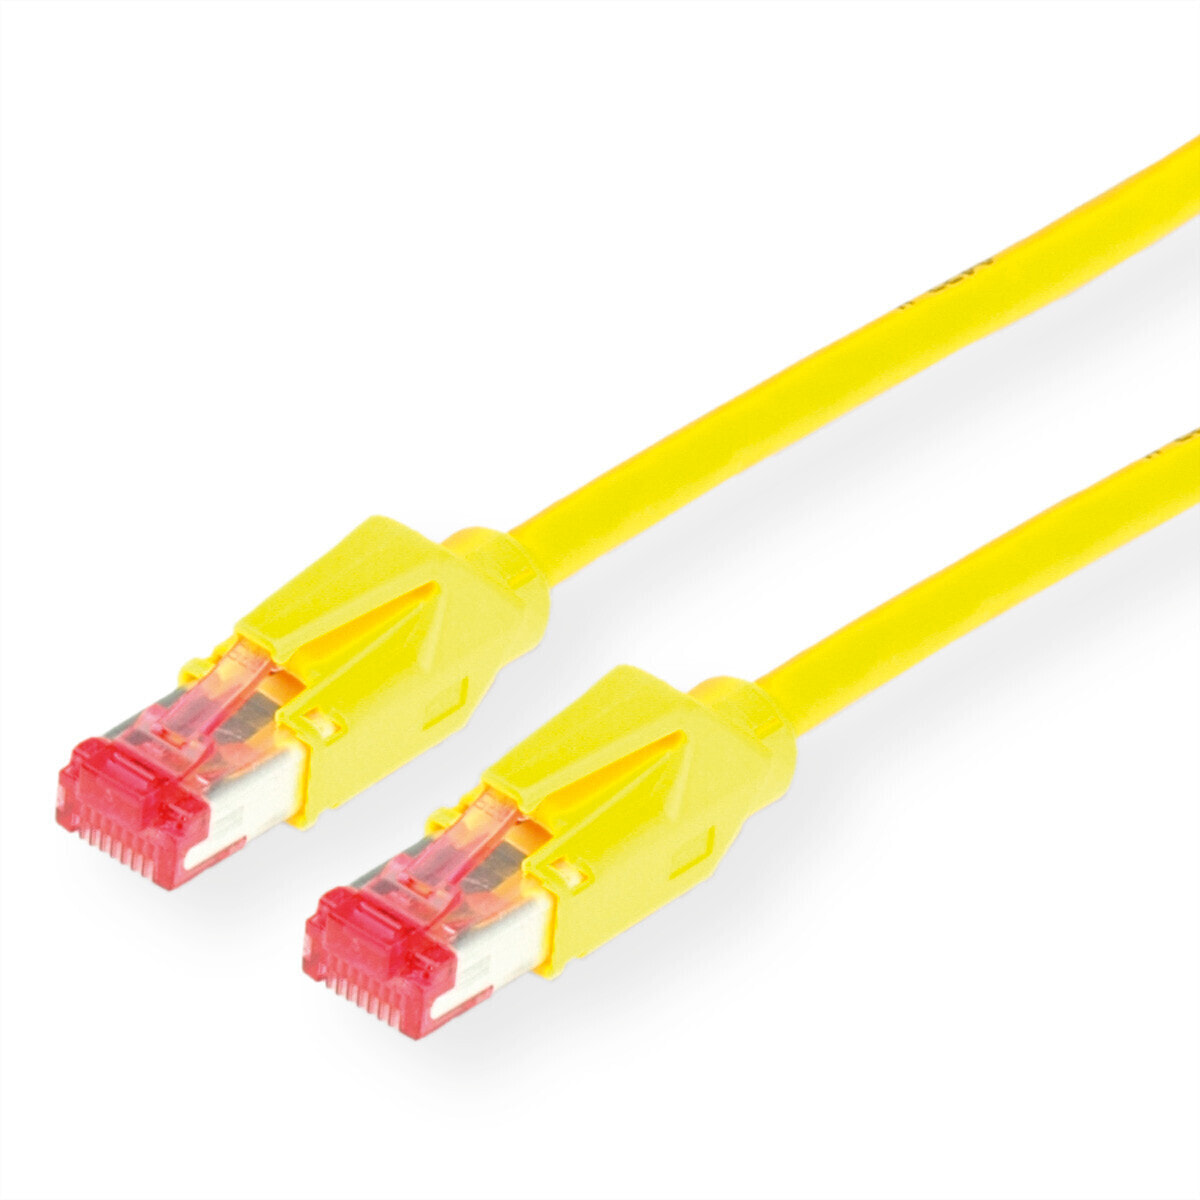 F6-90 S/F H Kat. 6 7.0 m gelb TM21 - Cable - Network